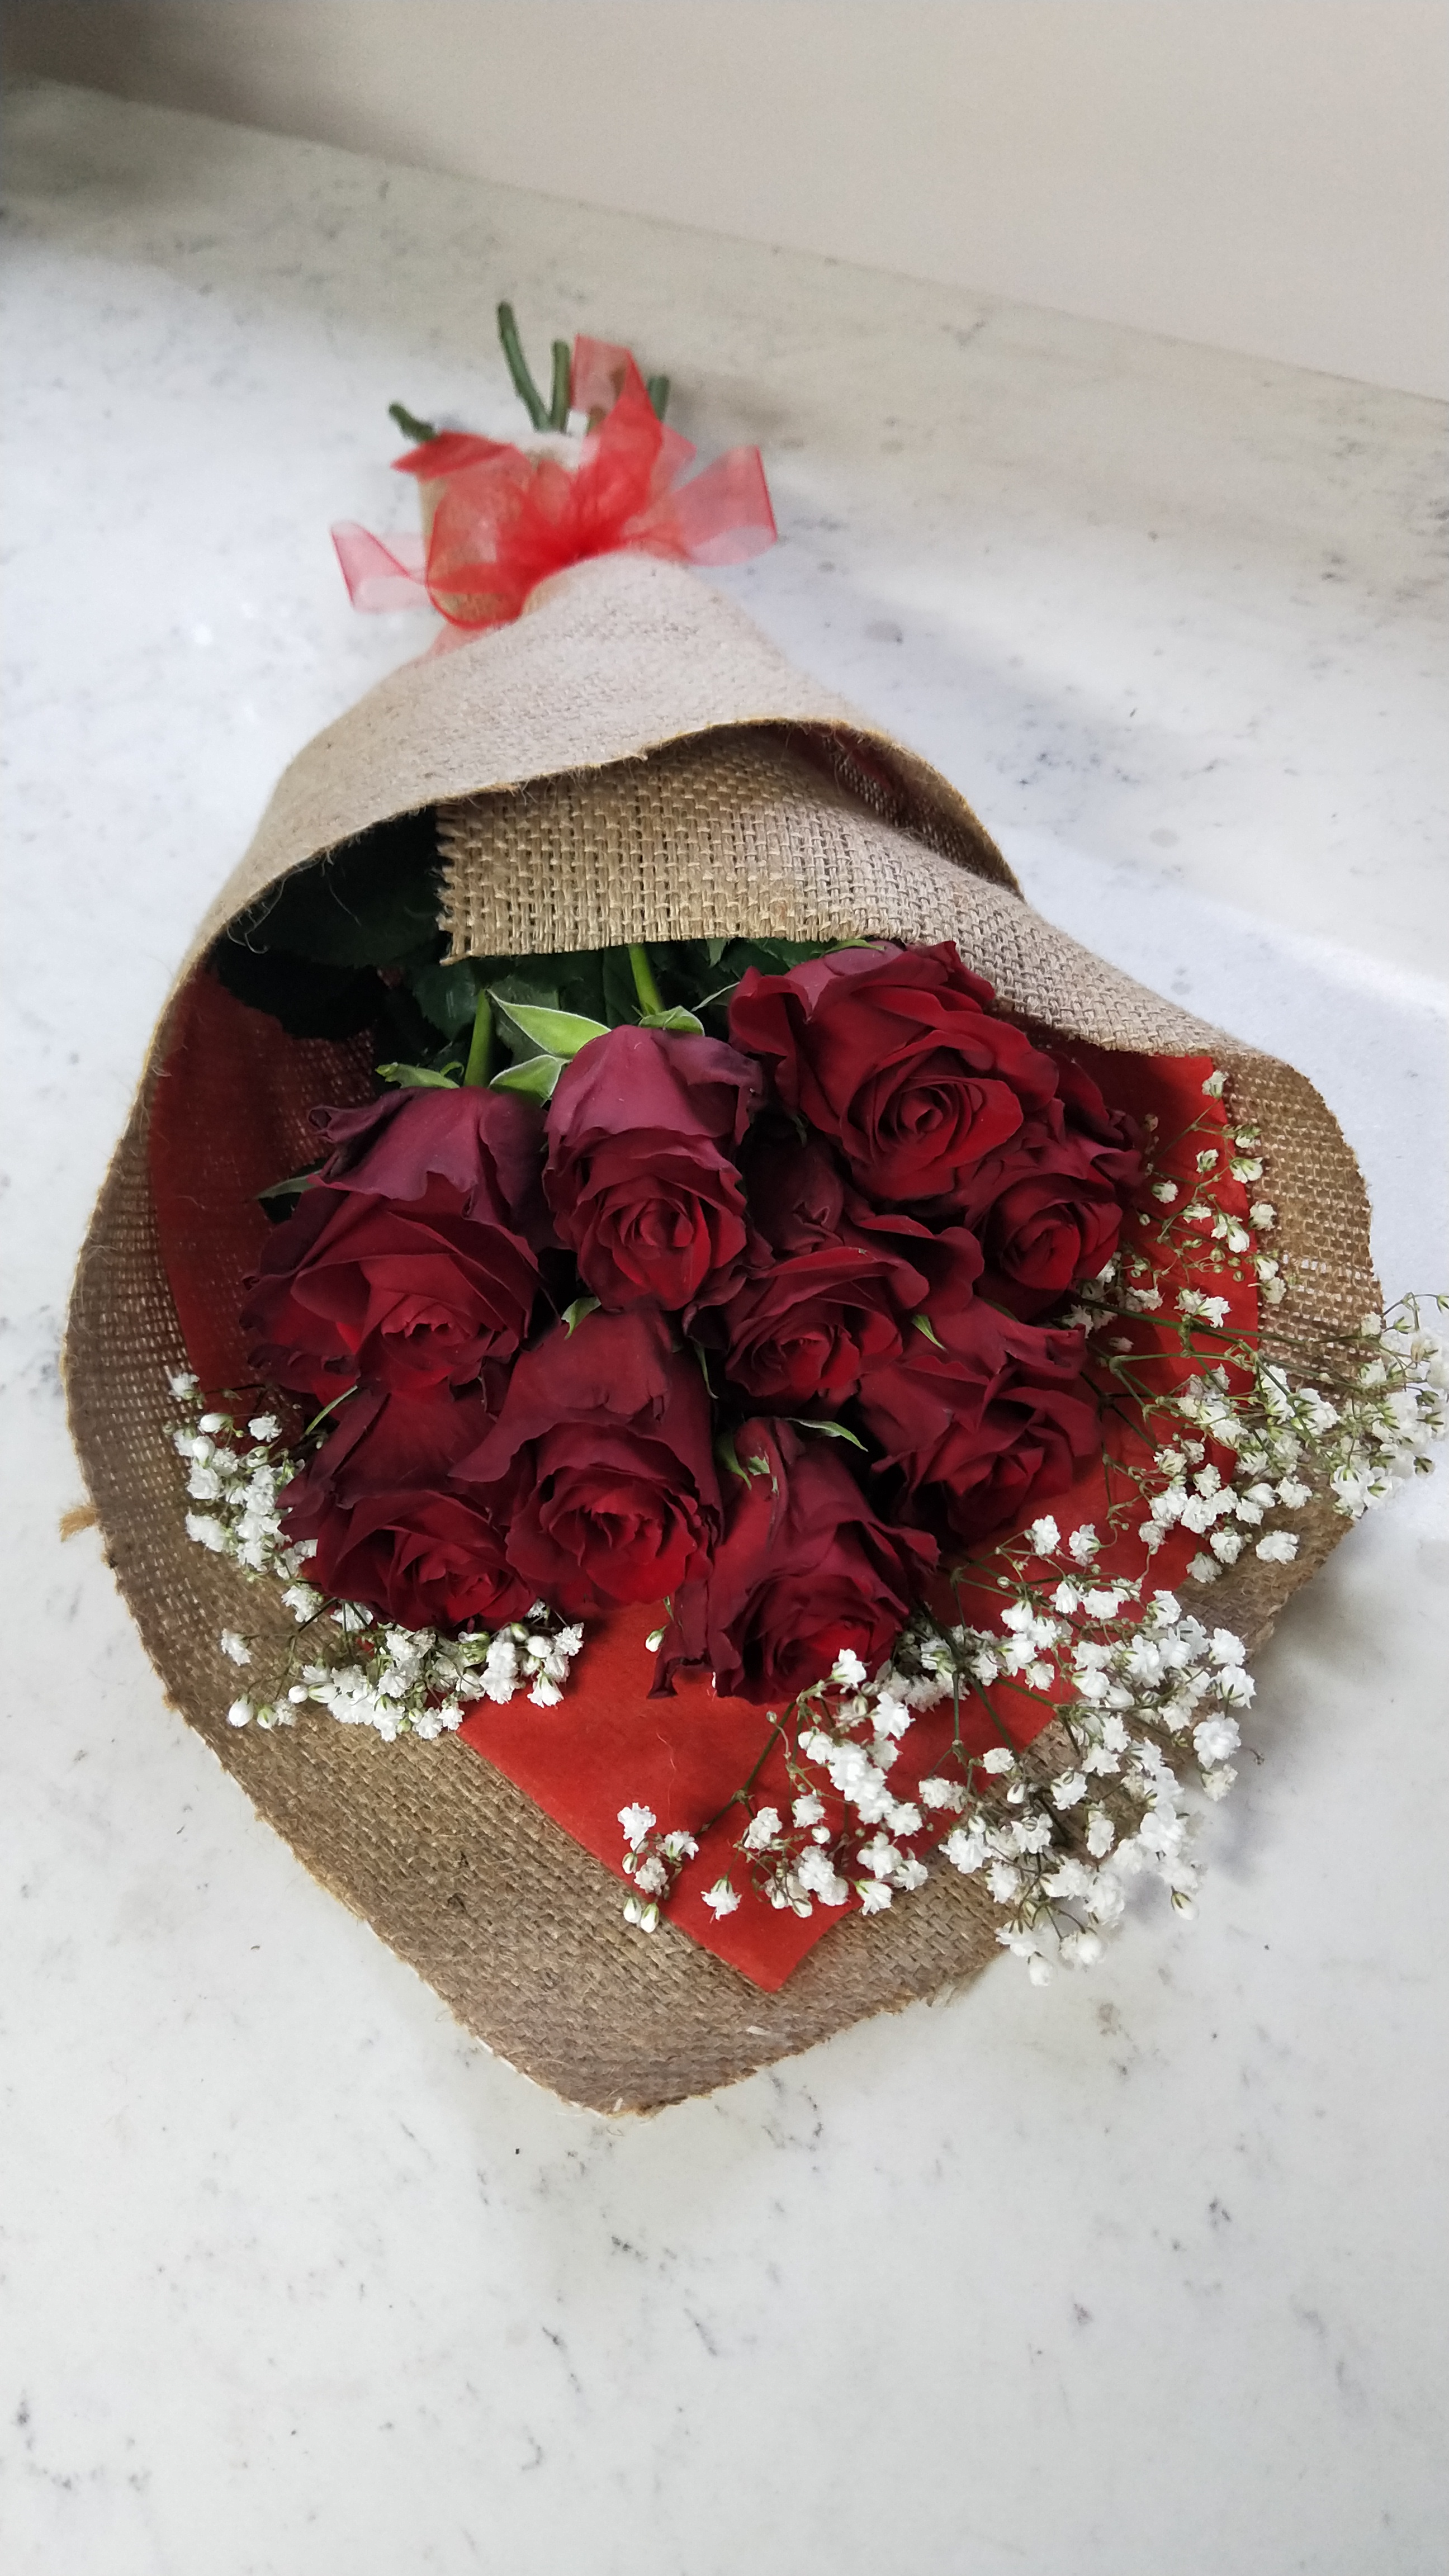 Red Roses bouquet makes a perfect gift for all loved ones.